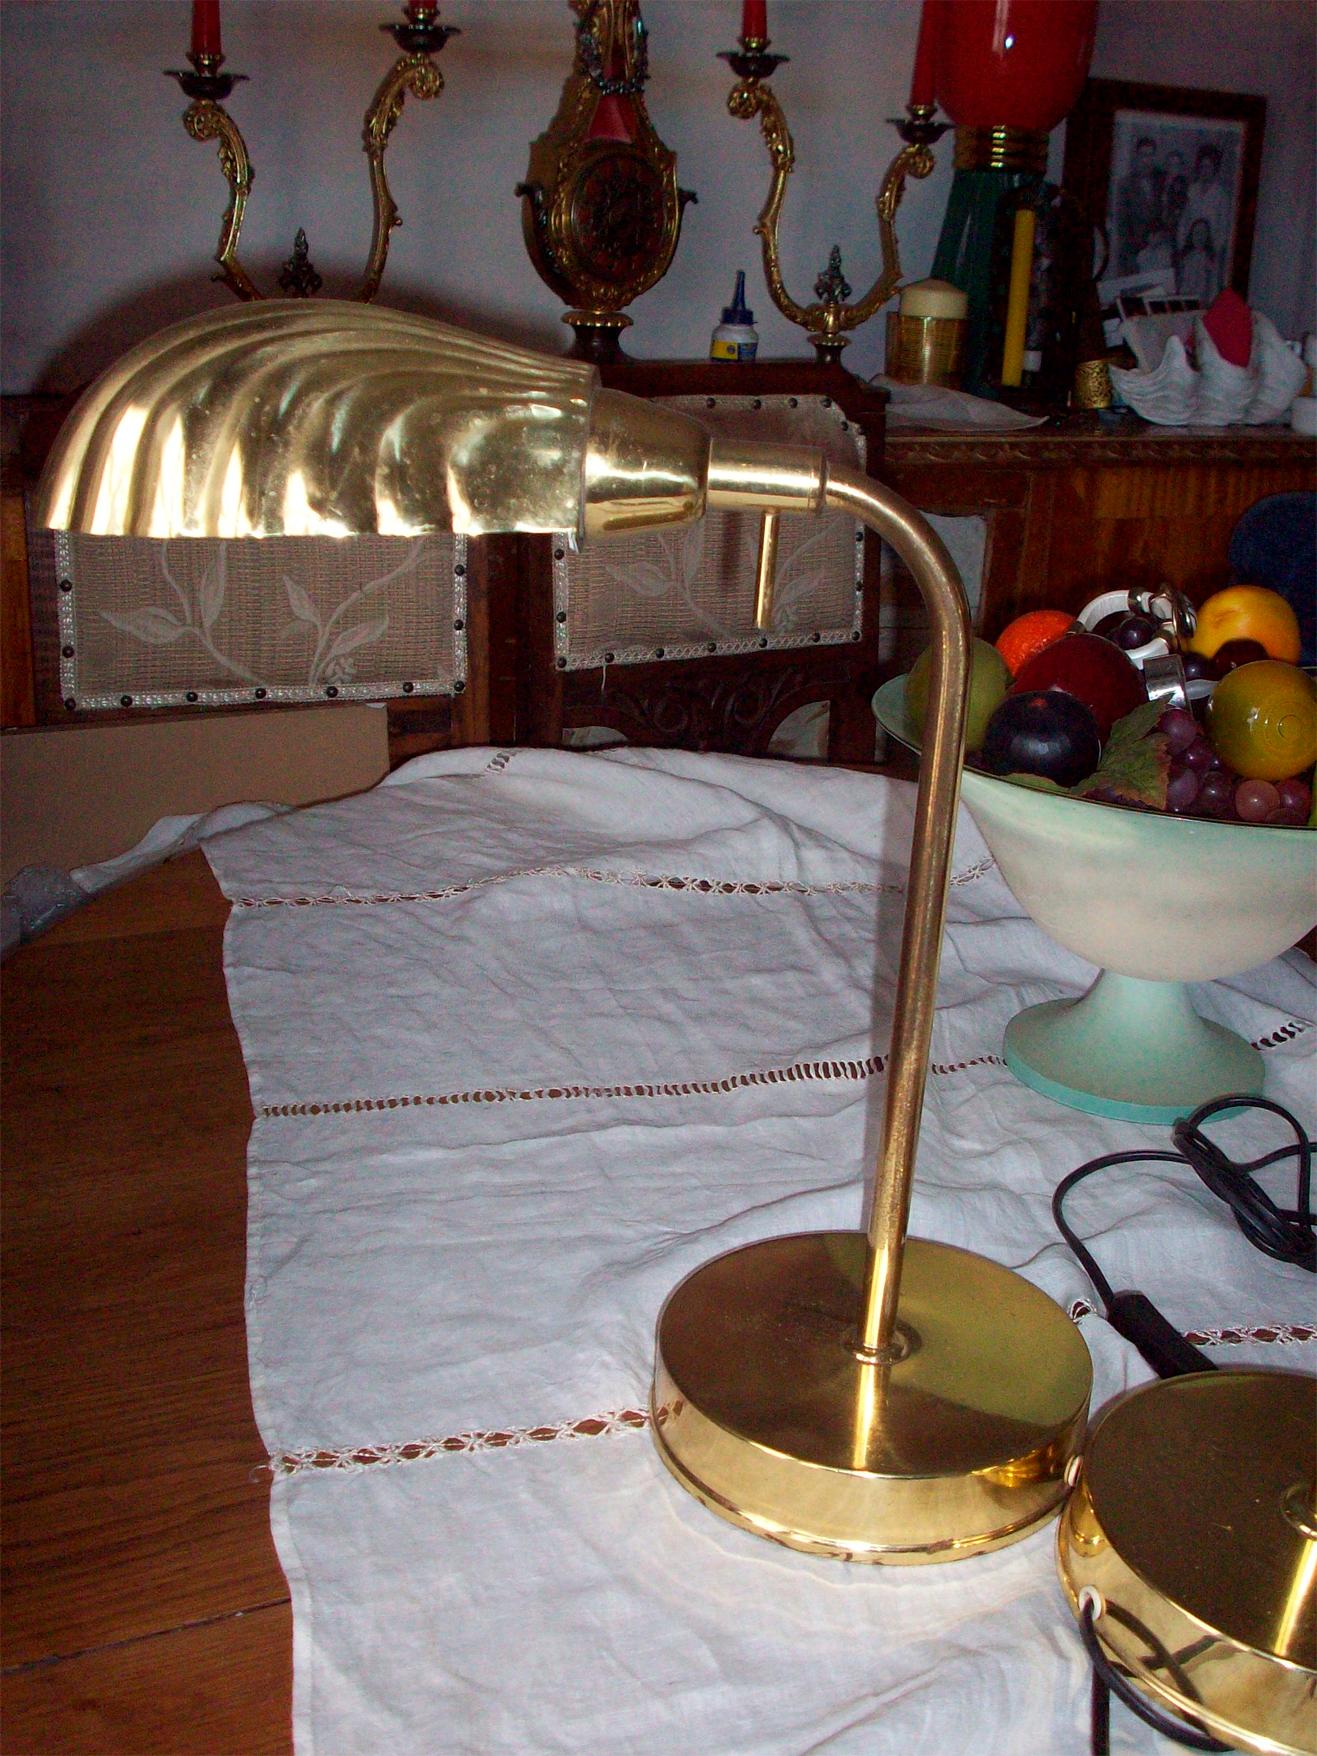 Desk shell Flexo lamps, 20th century 

They are two lamps or desk lamps, for bedside tables with an upper shade in the shape of a brass shell.
The condition of the lamps is very good, it has no noteworthy wear and retains the shine of the